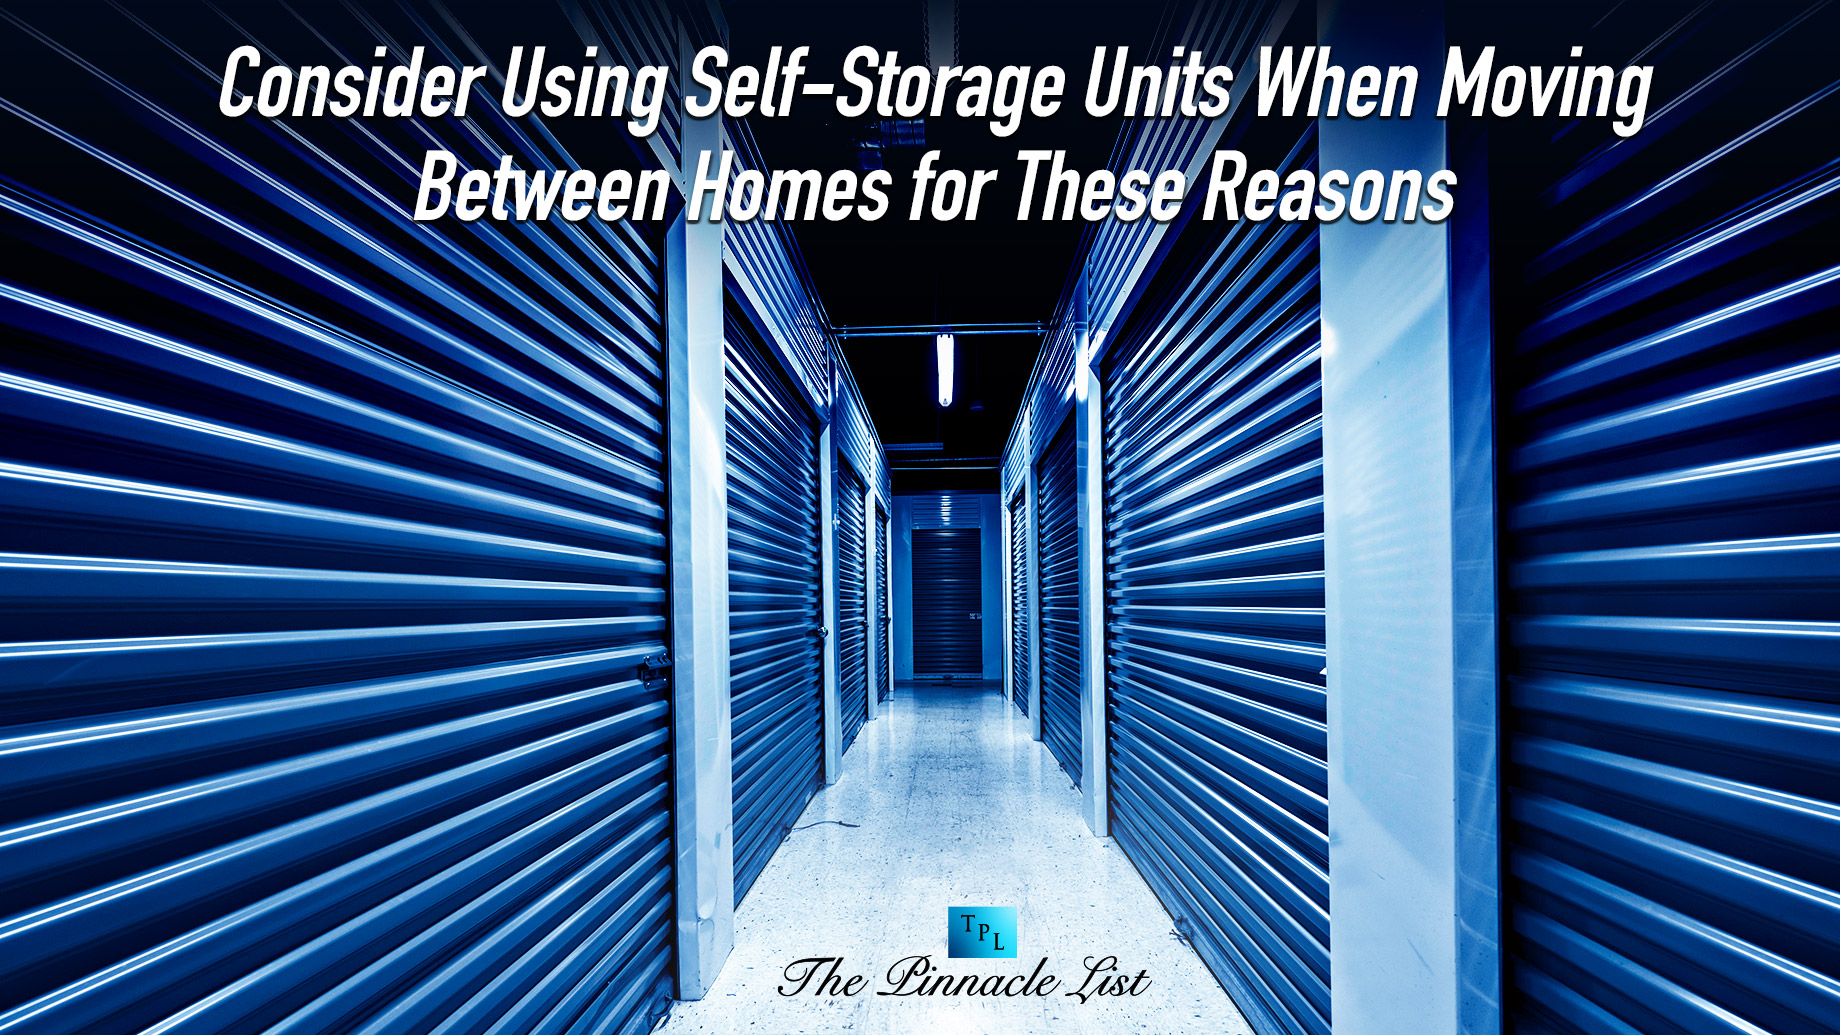 Consider Using Self-Storage Units When Moving Between Homes for These Reasons